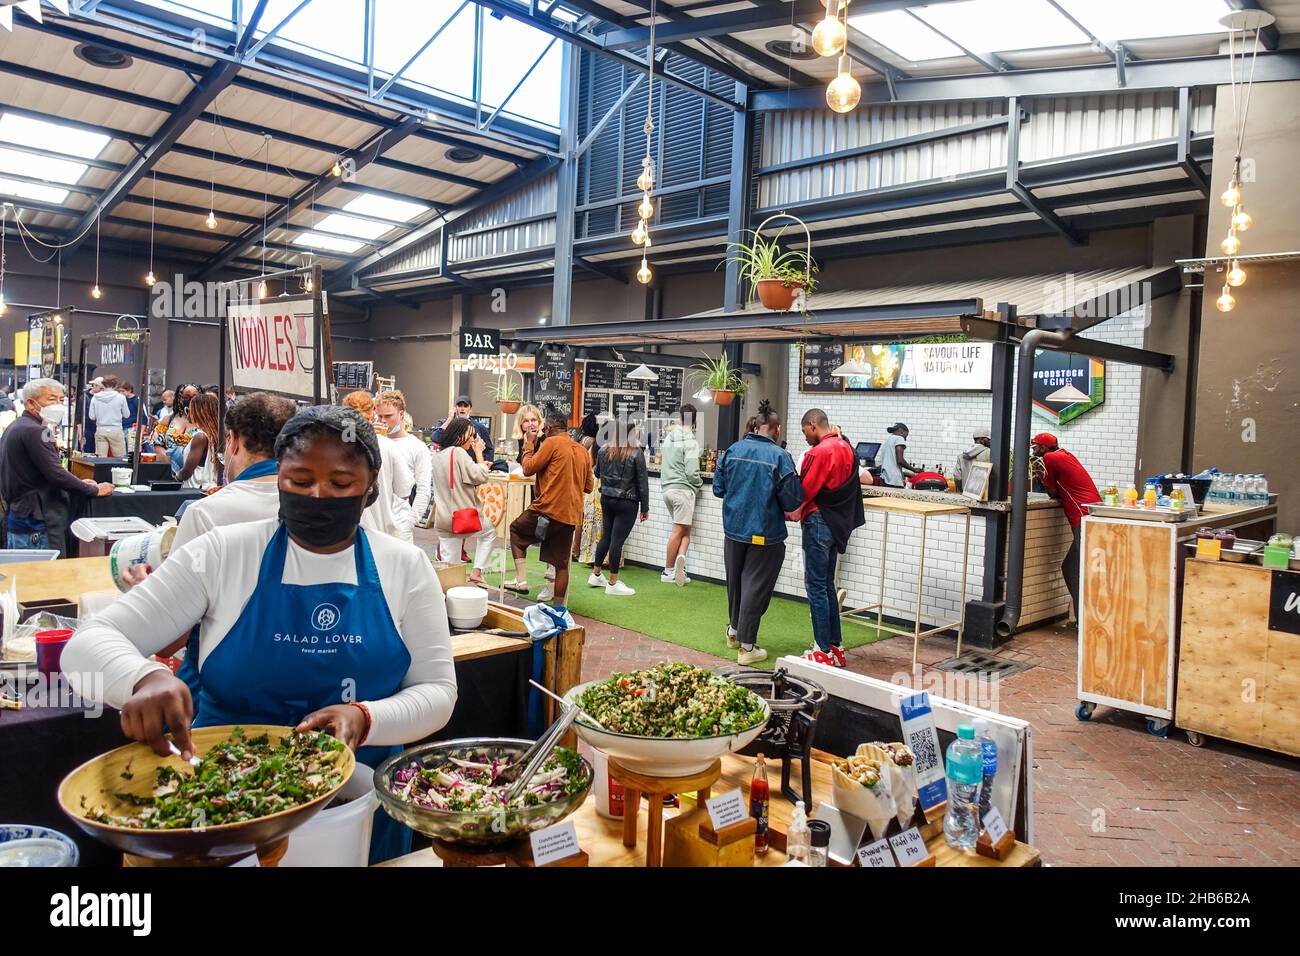 Food stalls at the Neighbourgoods market in Cape Town, South Africa Stock Photo